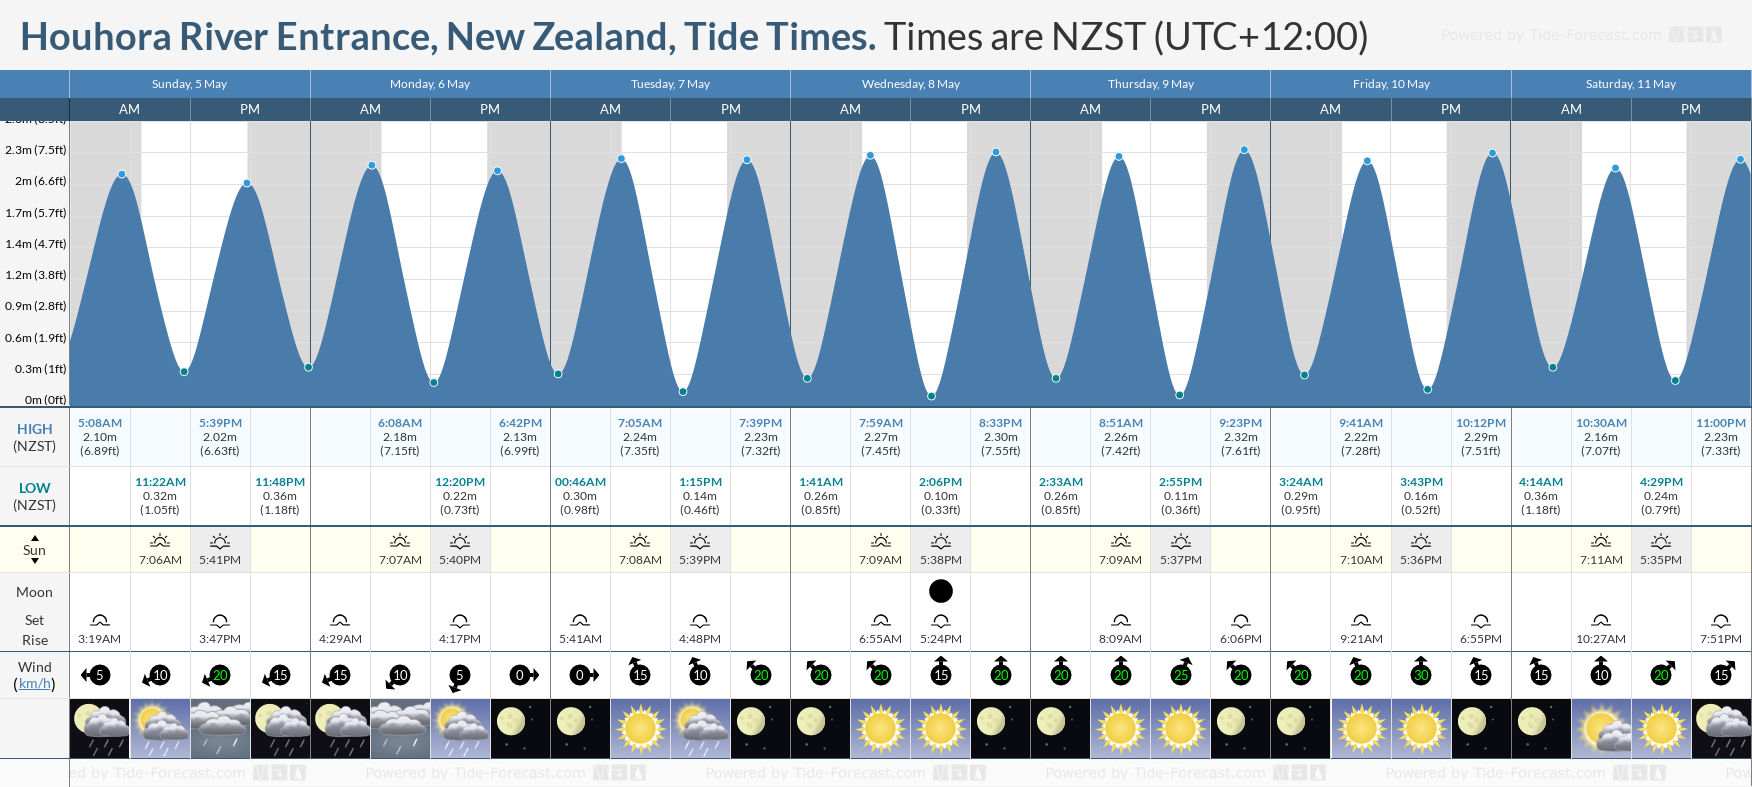 Houhora River Entrance, New Zealand Tide Chart including high and low tide times for the next 7 days